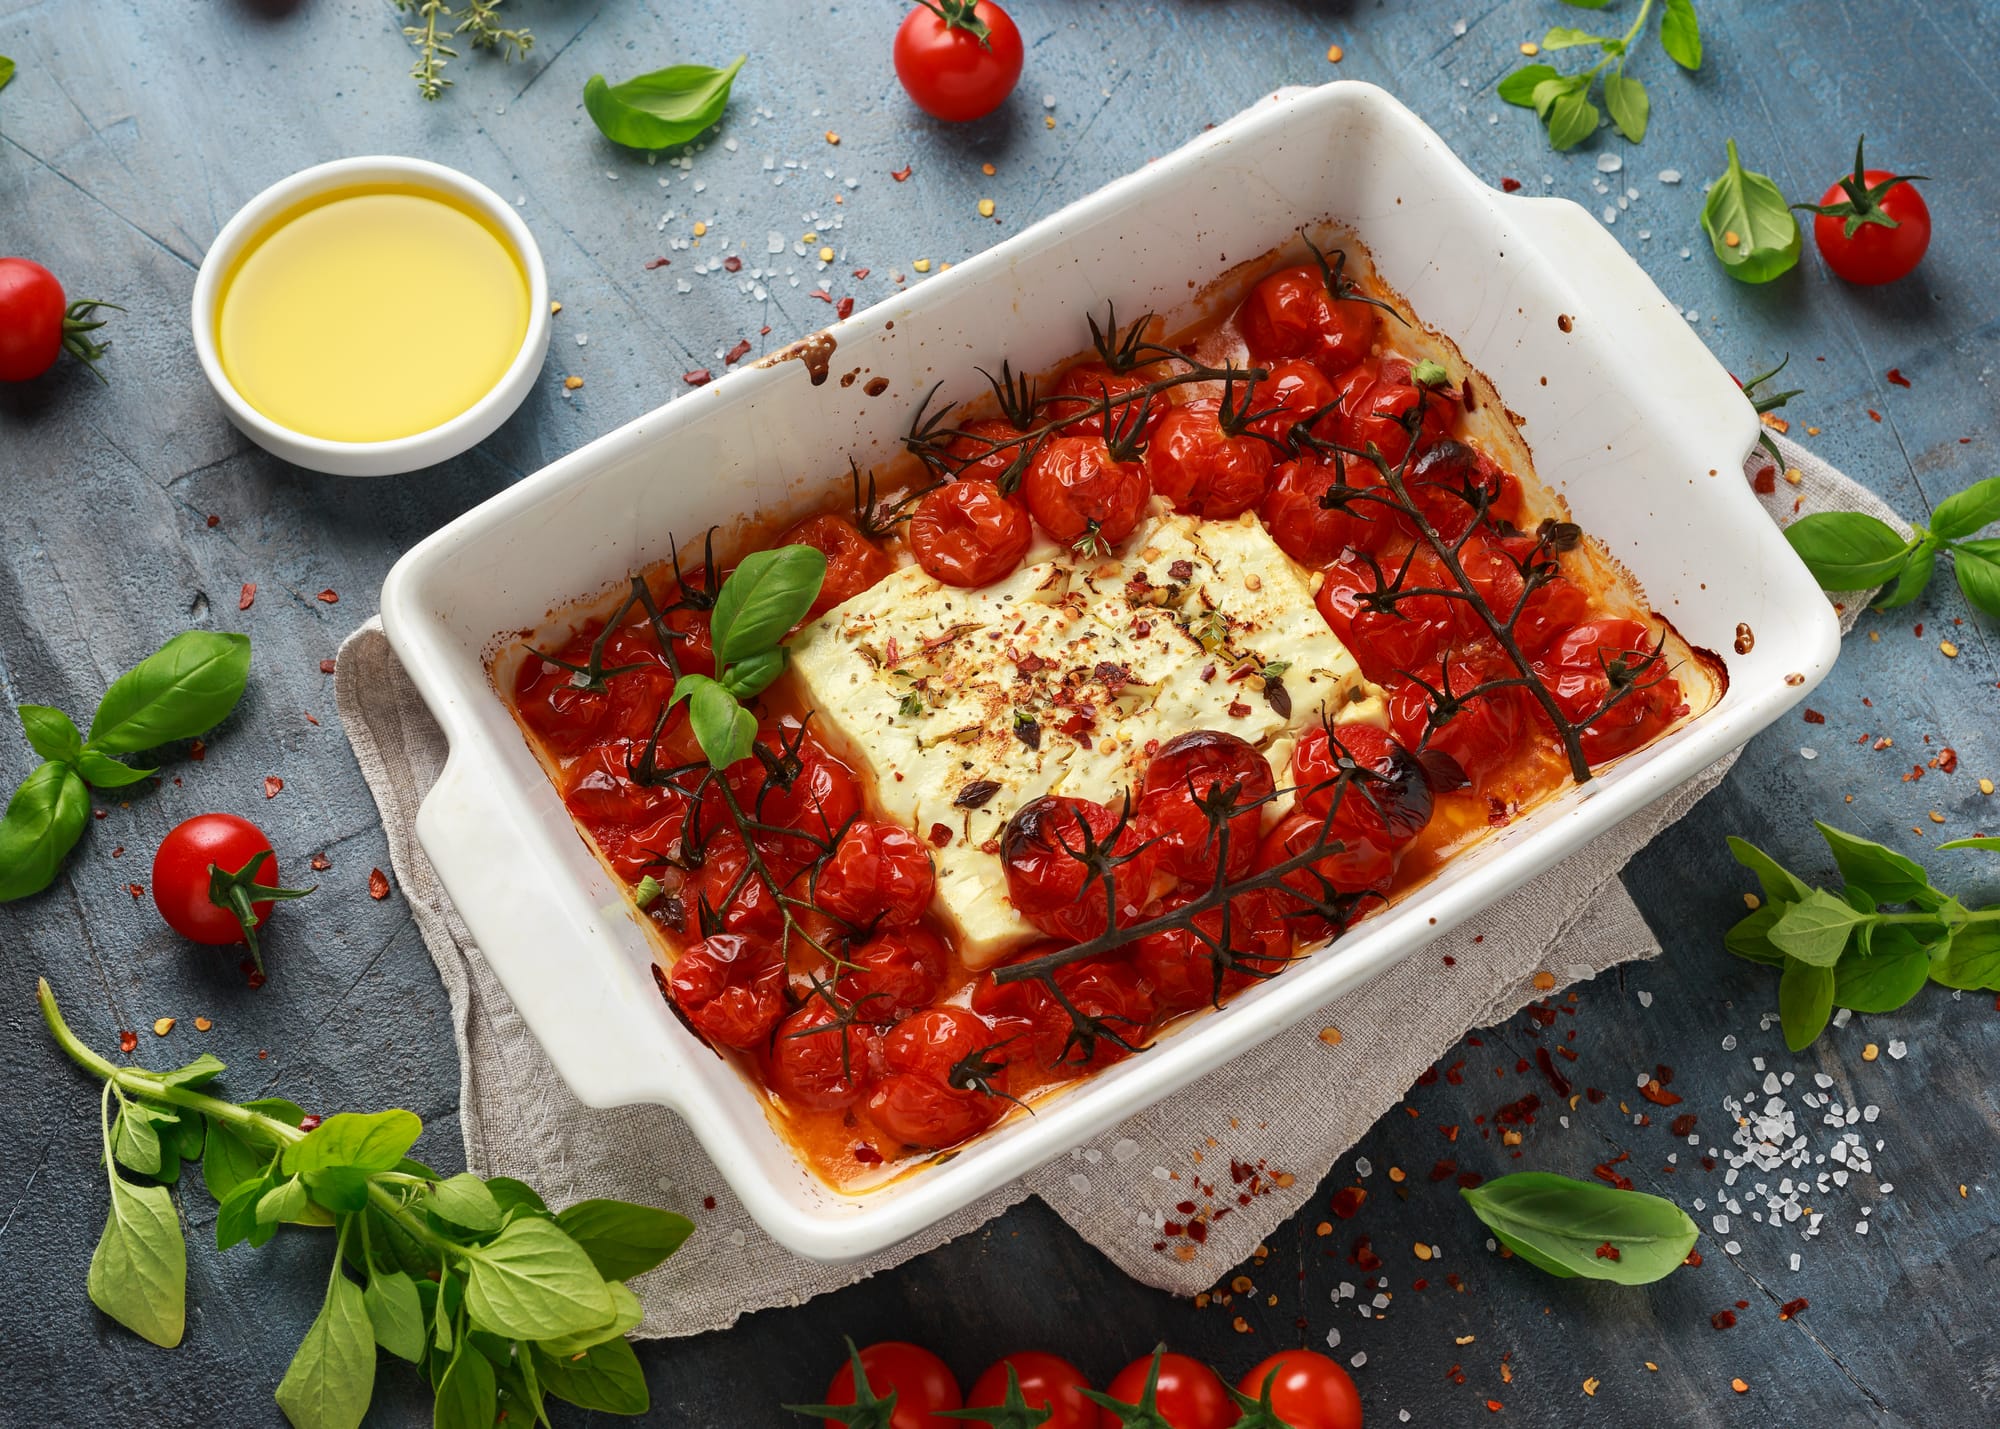 Baked Feta with Tomatoes and Pomegranate